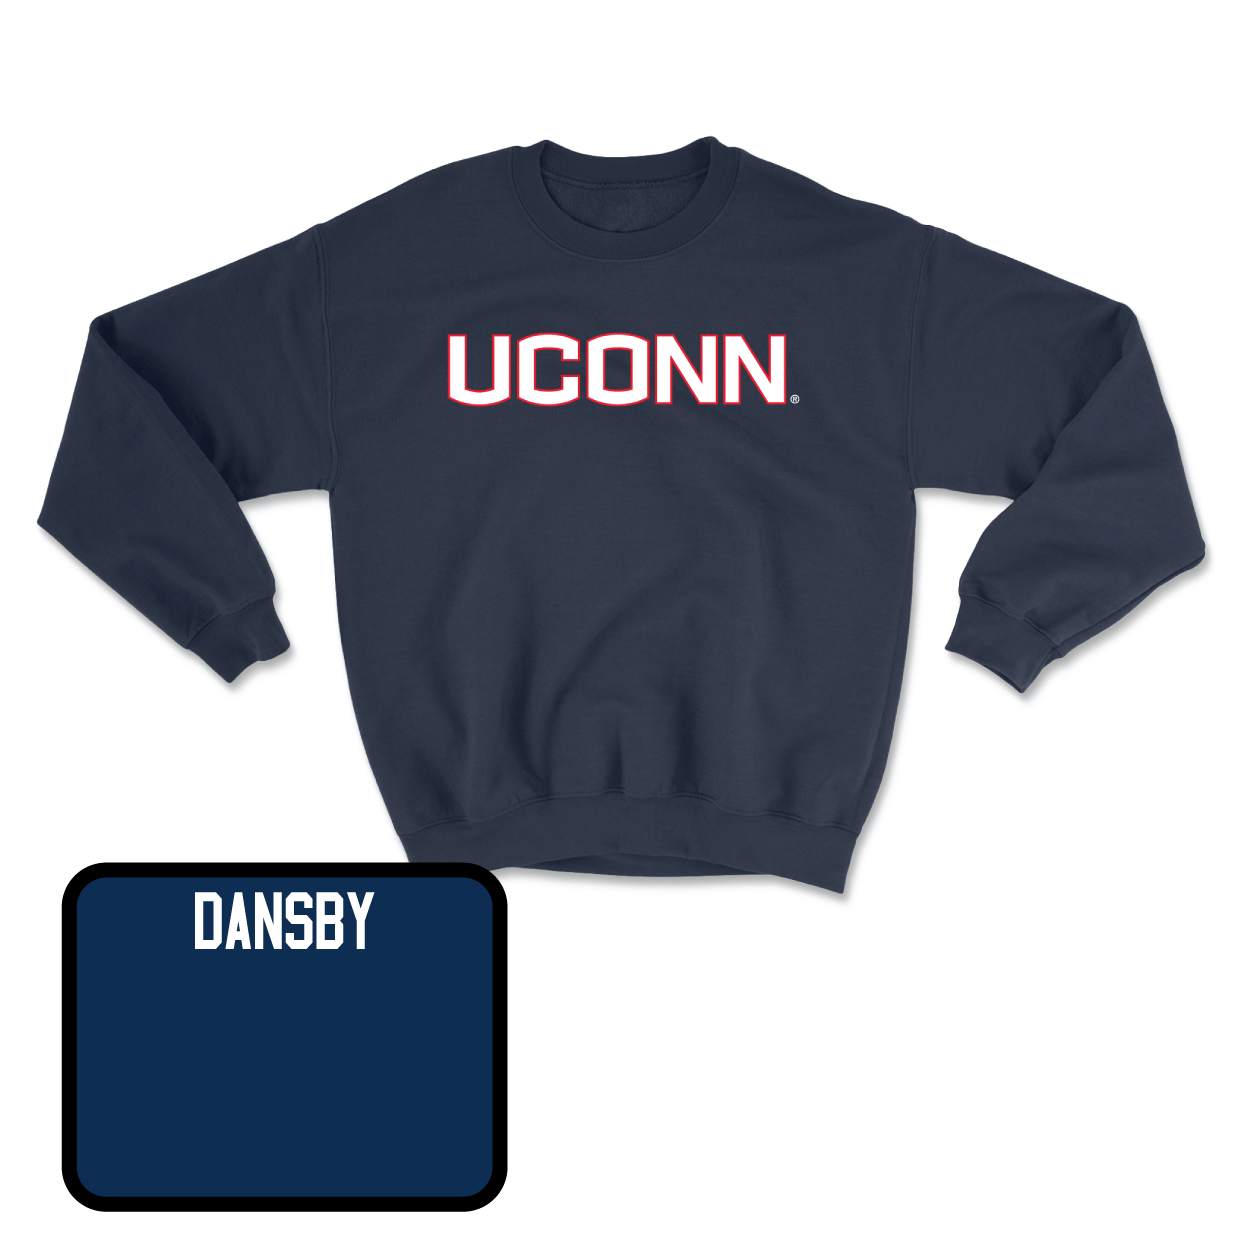 Navy Women's Track & Field UConn Crewneck Small / Mia Dansby